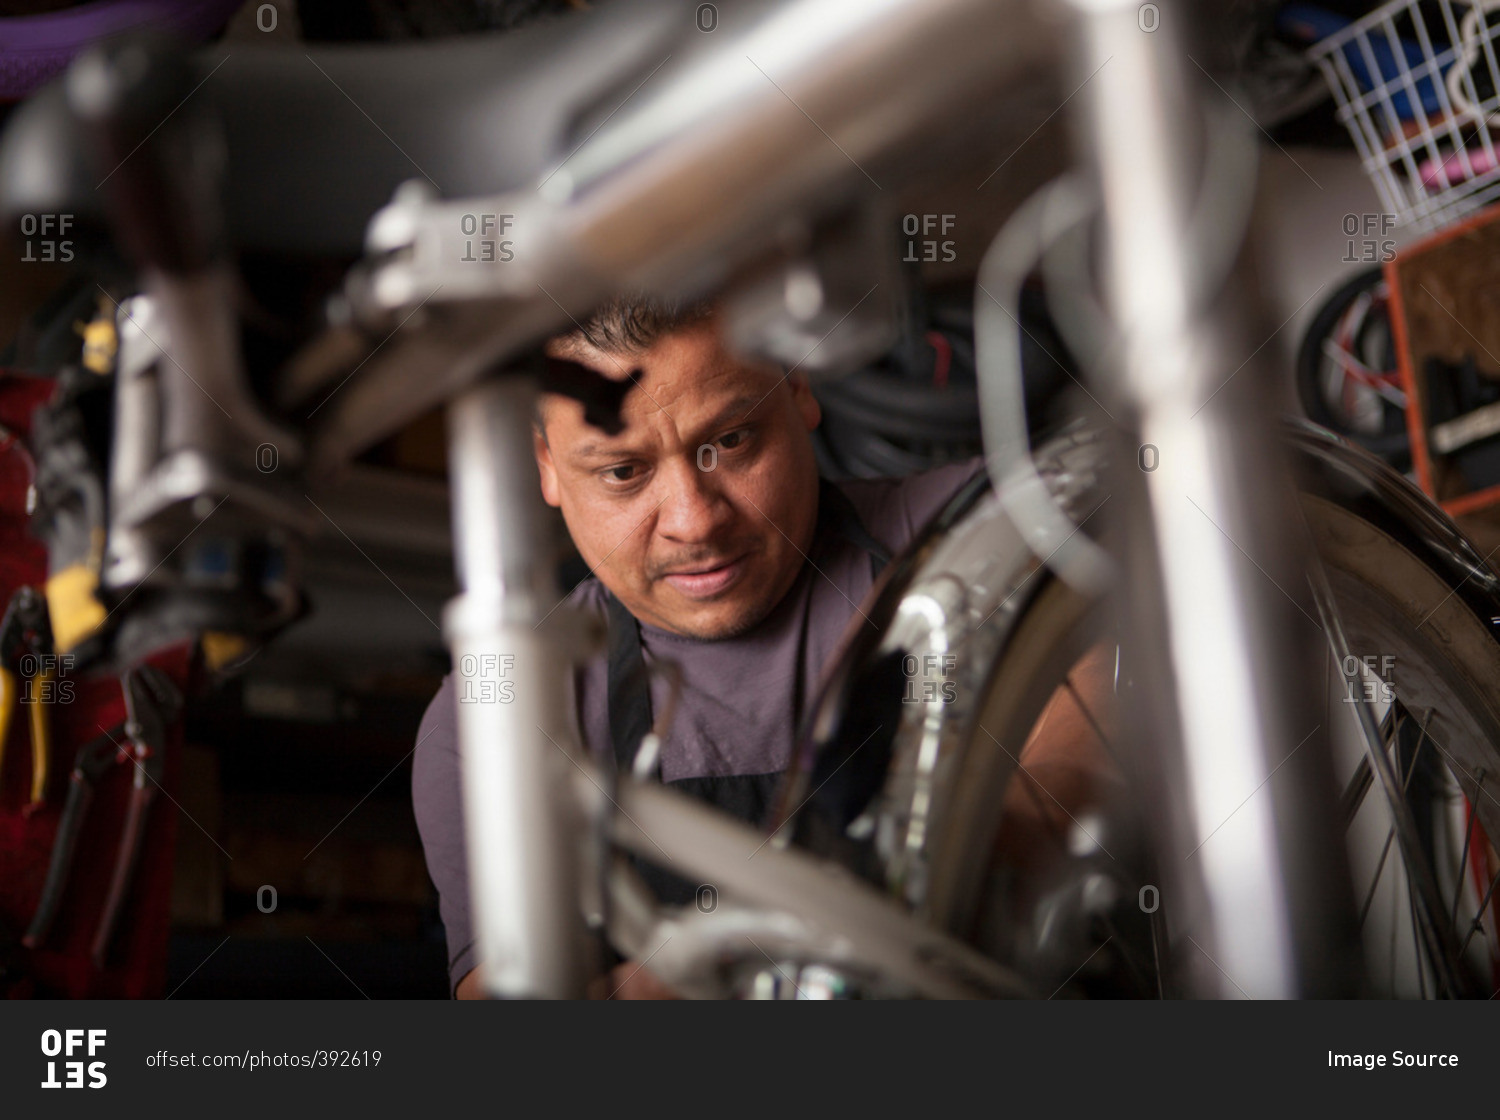 Mechanic at work in bicycle shop